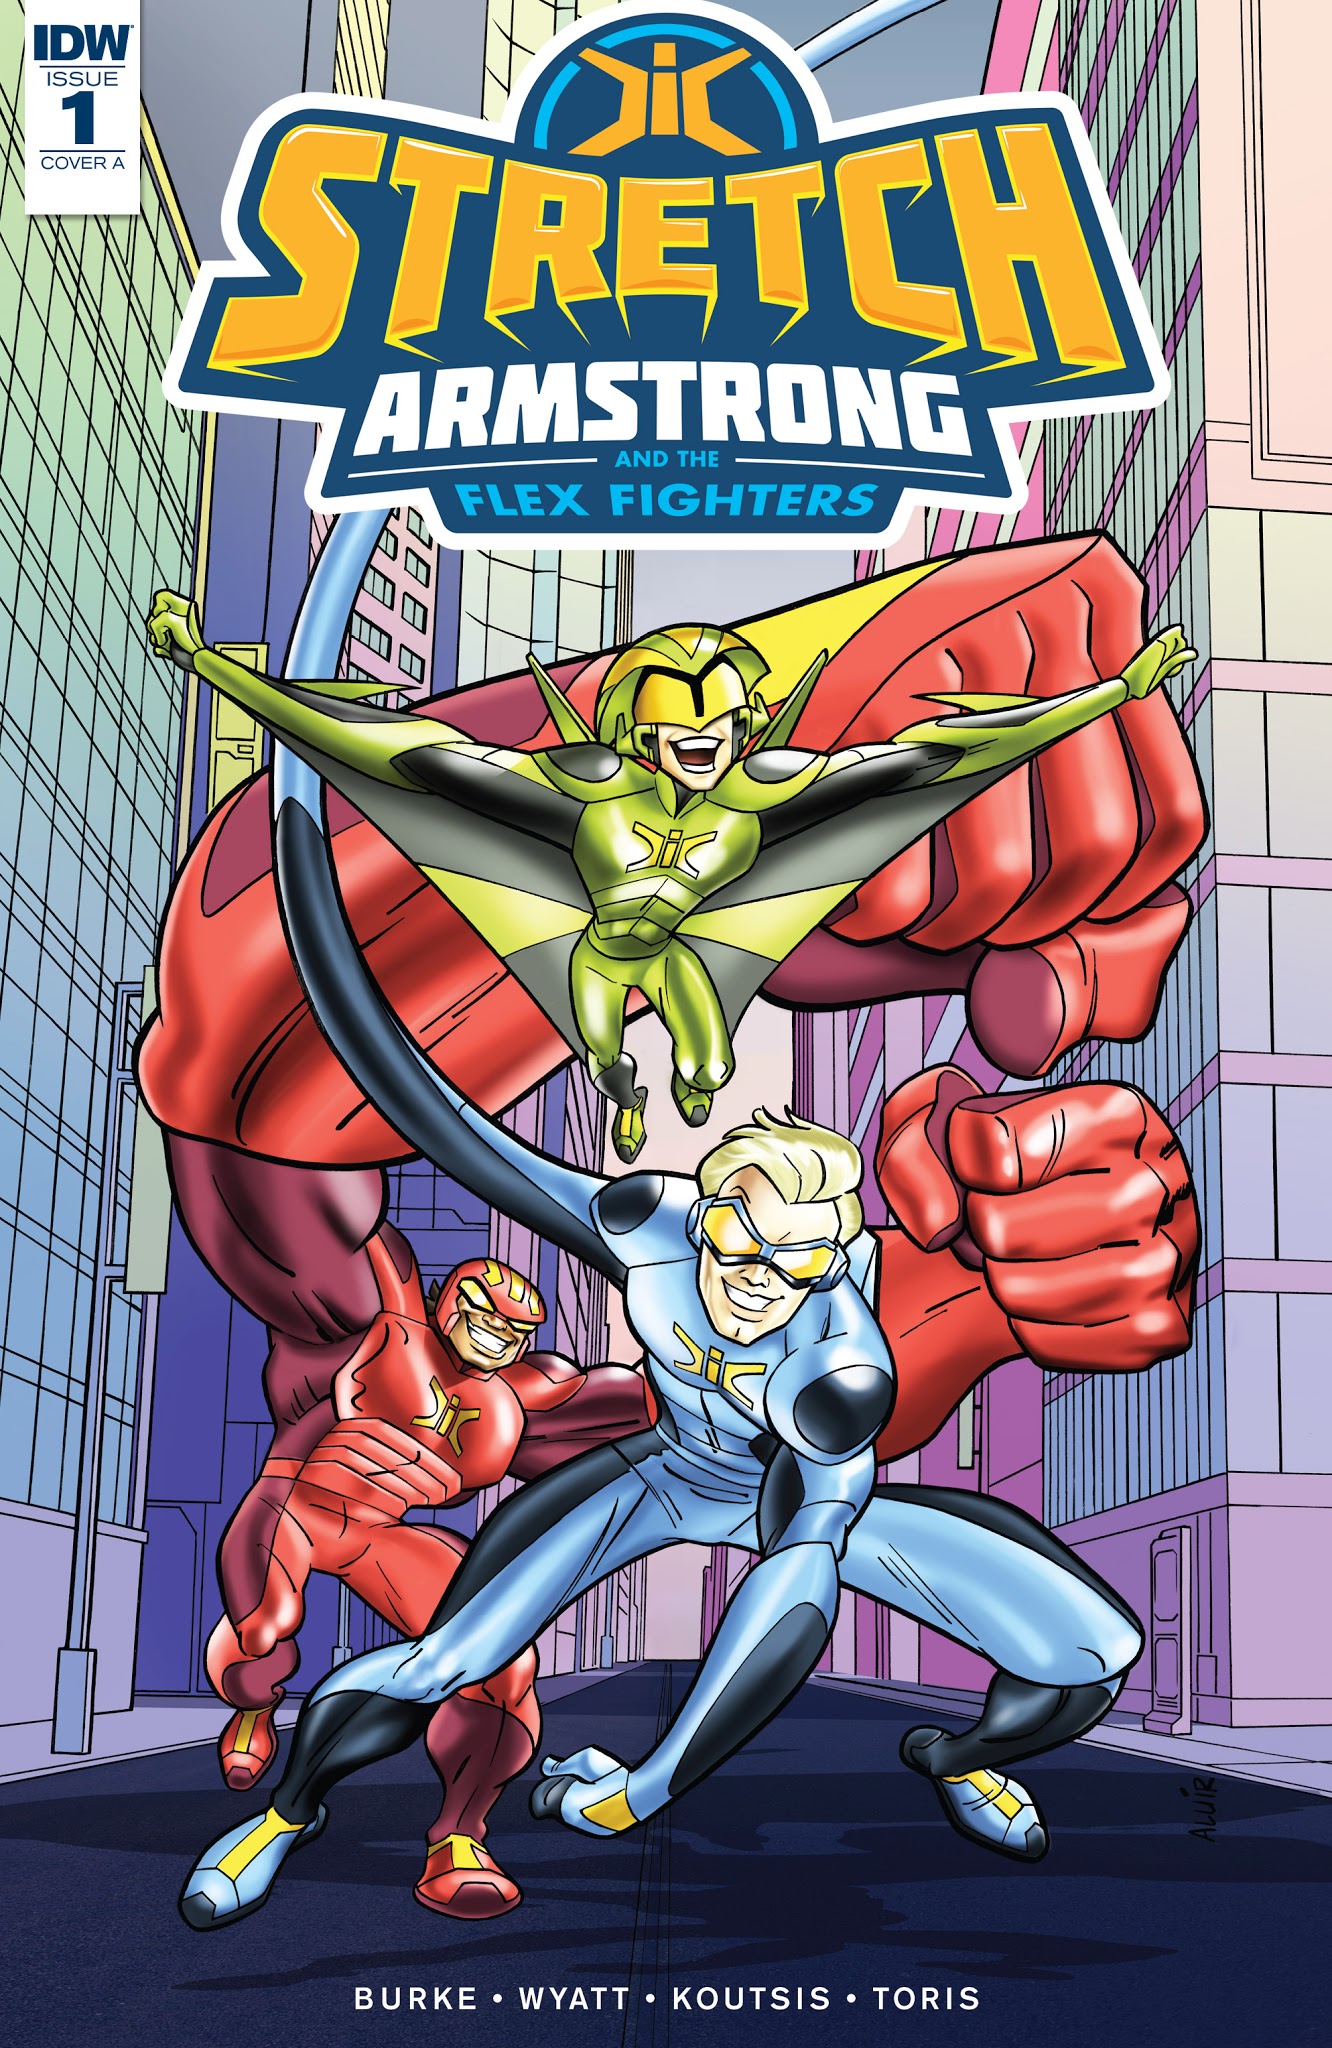 Read online Stretch Armstrong and the Flex Fighters comic -  Issue #1 - 1